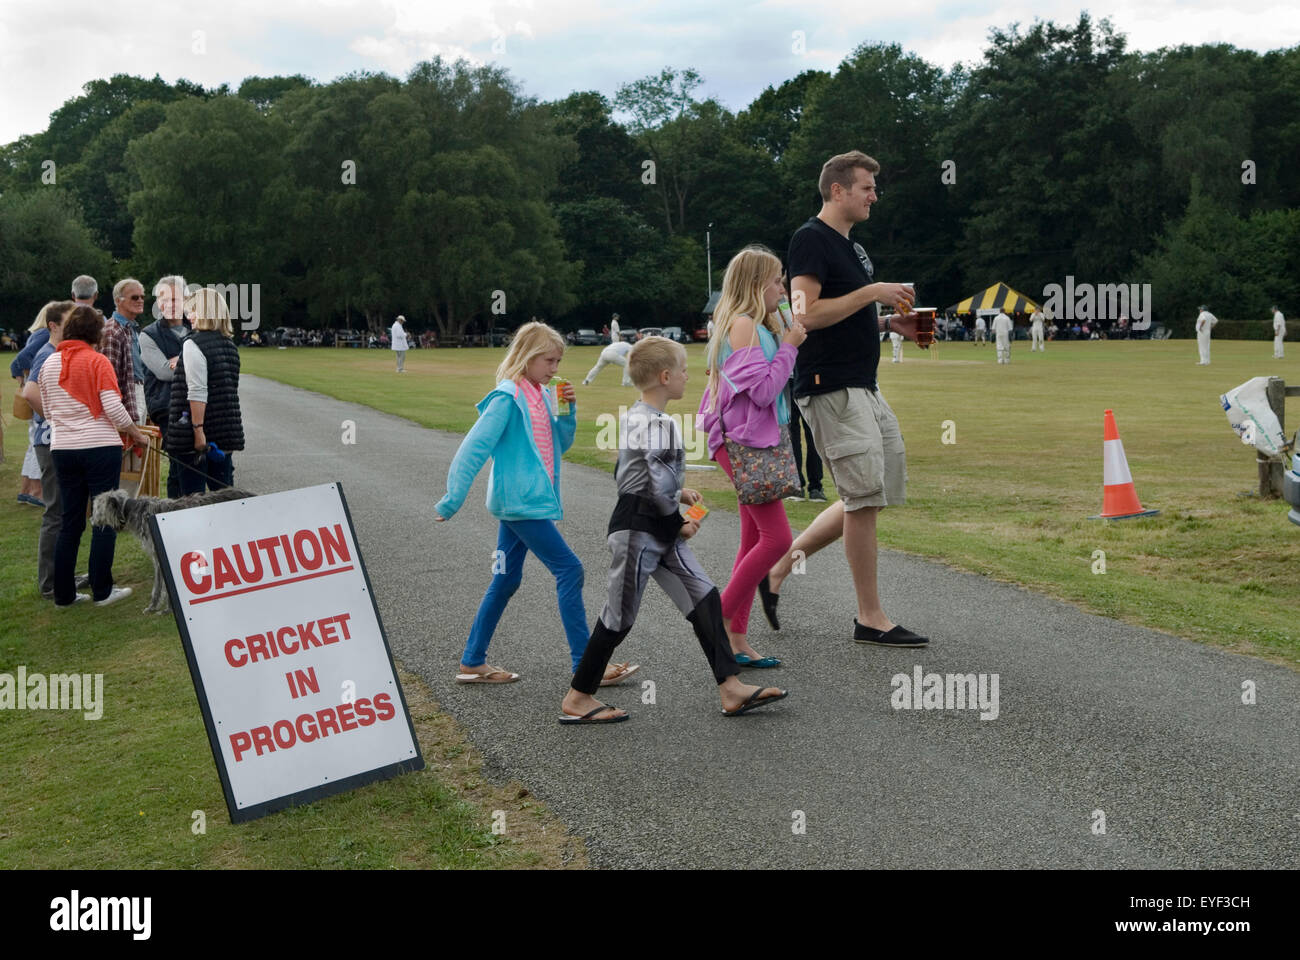 Family life in Britain, village cricket game in progress. Father and three children carrying glasses of beer group of spectators chatting.  Sussex Uk  2015 2010s HOMER SYKES Stock Photo